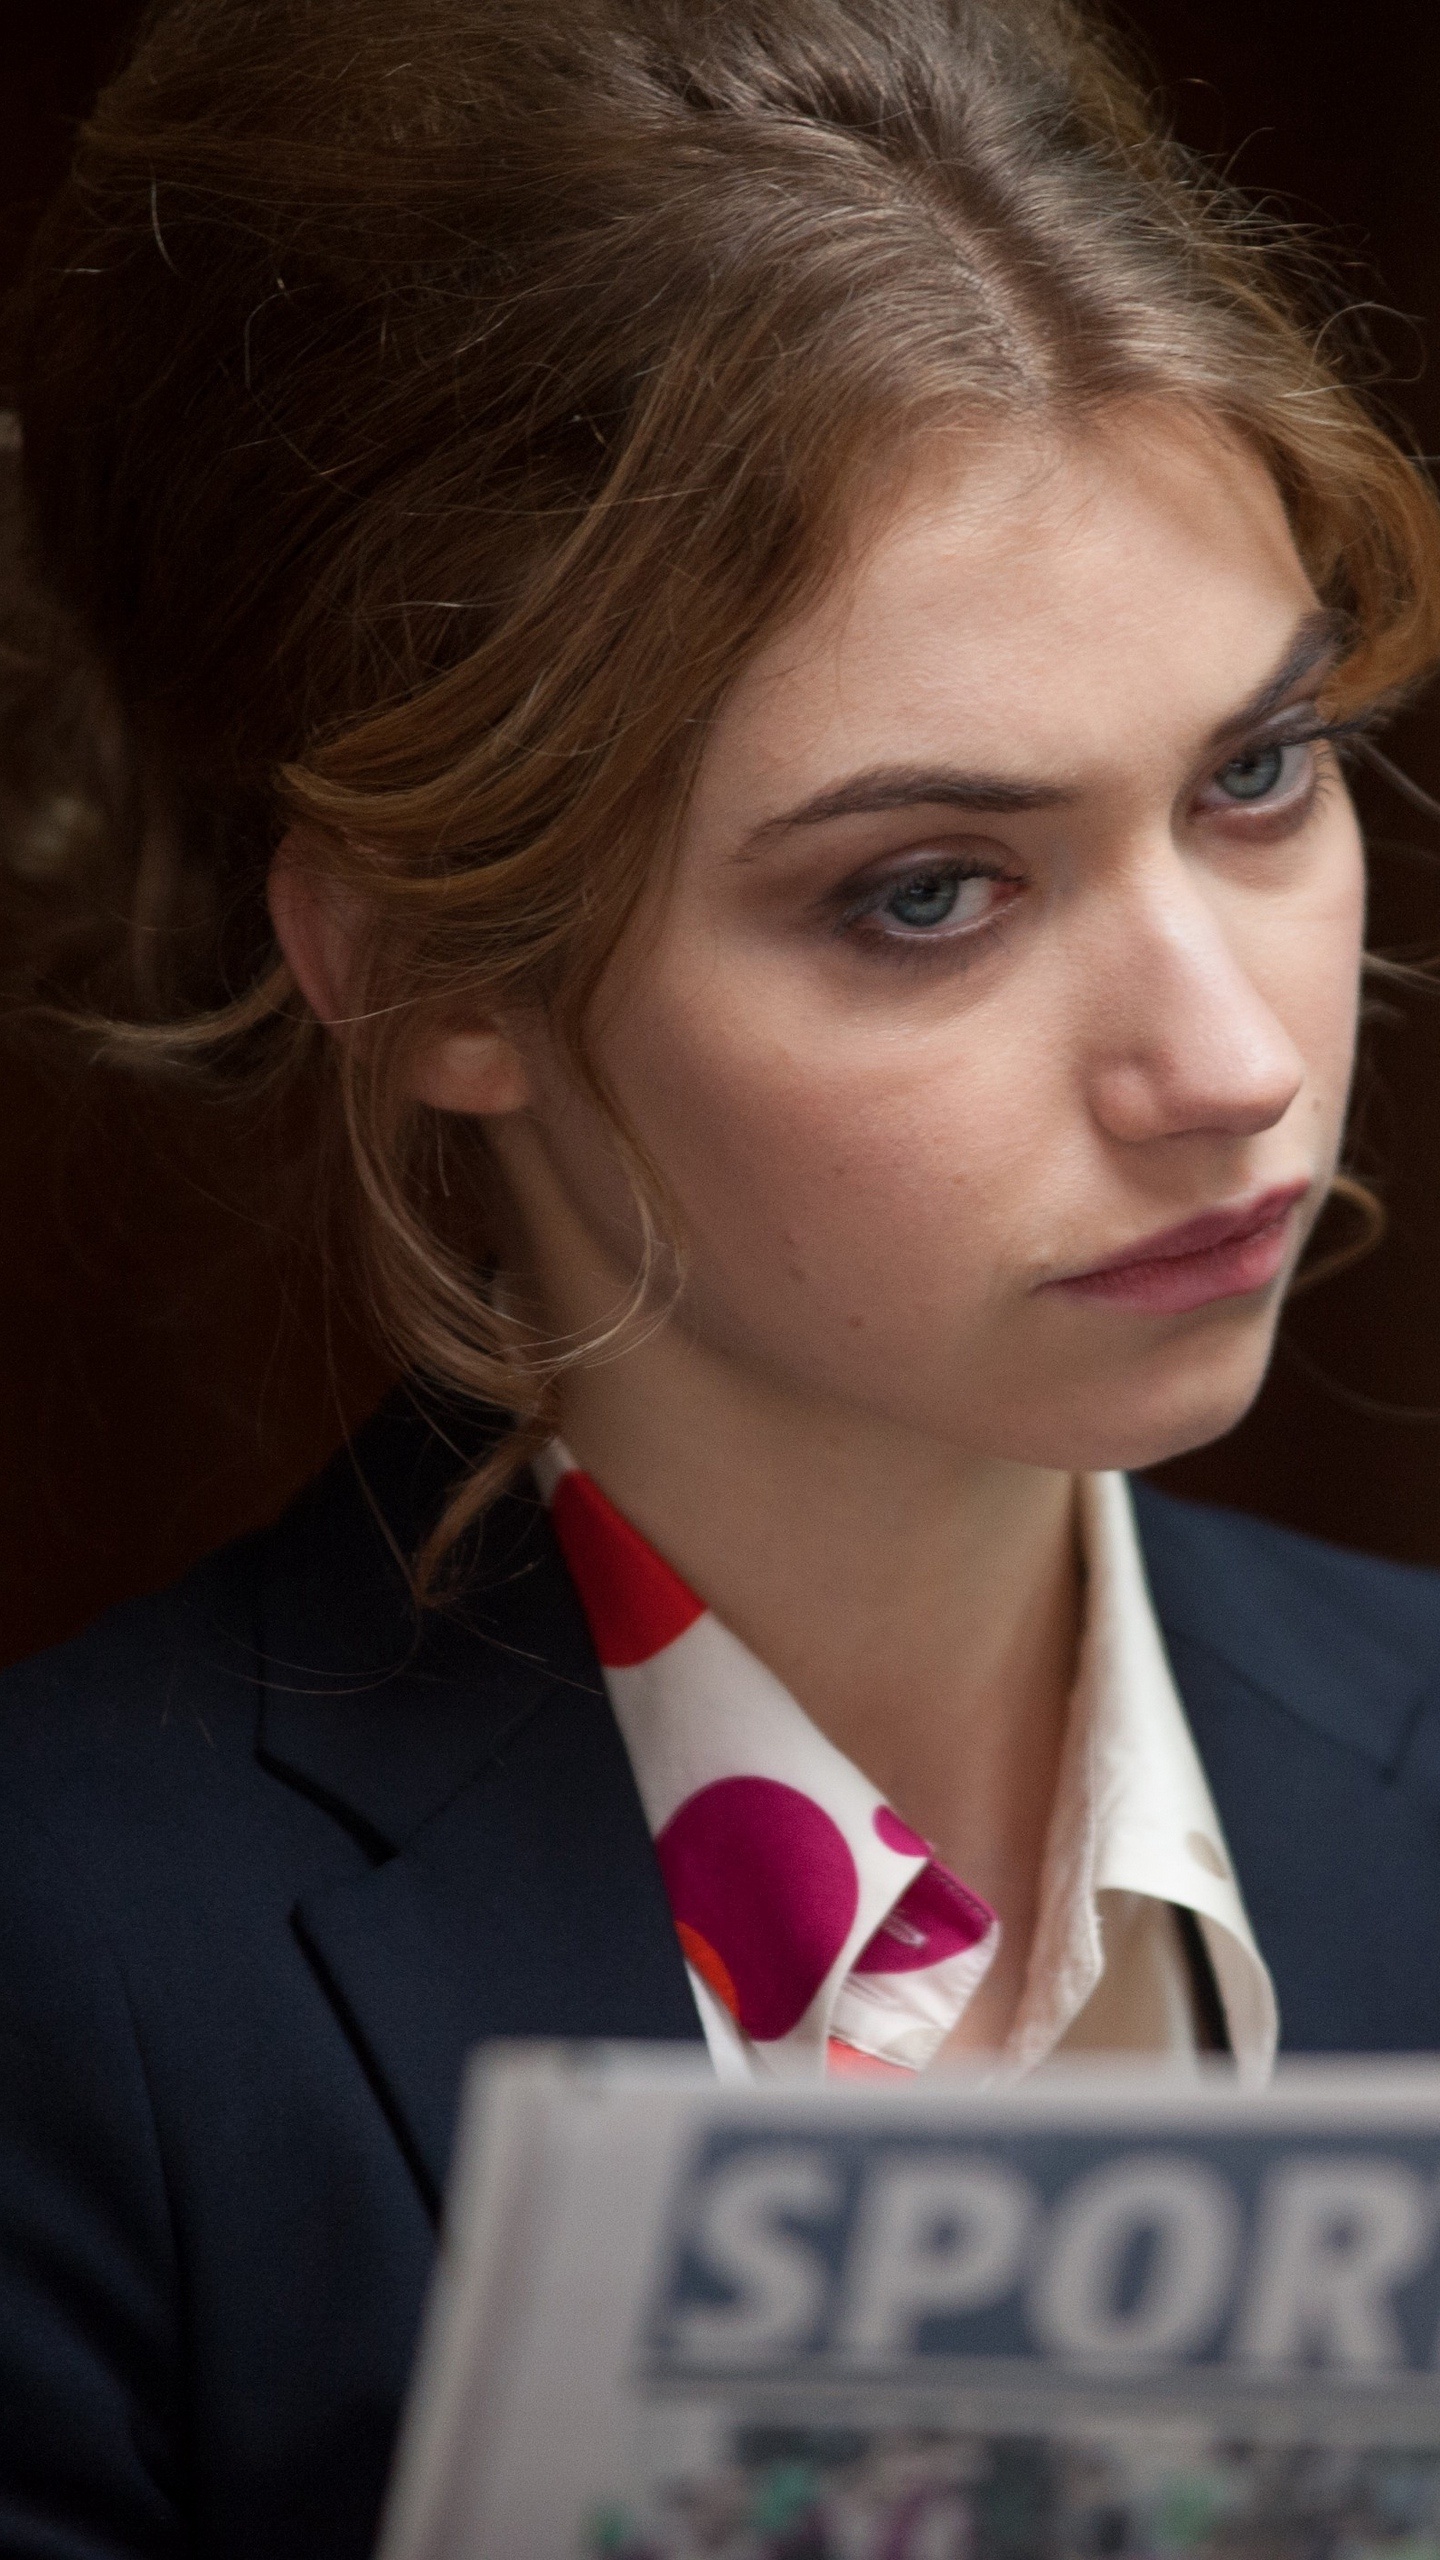 Imogen Poots movies, Fan-posted wallpapers, Christopher Thompson's collection, High-quality images, 1440x2560 HD Phone